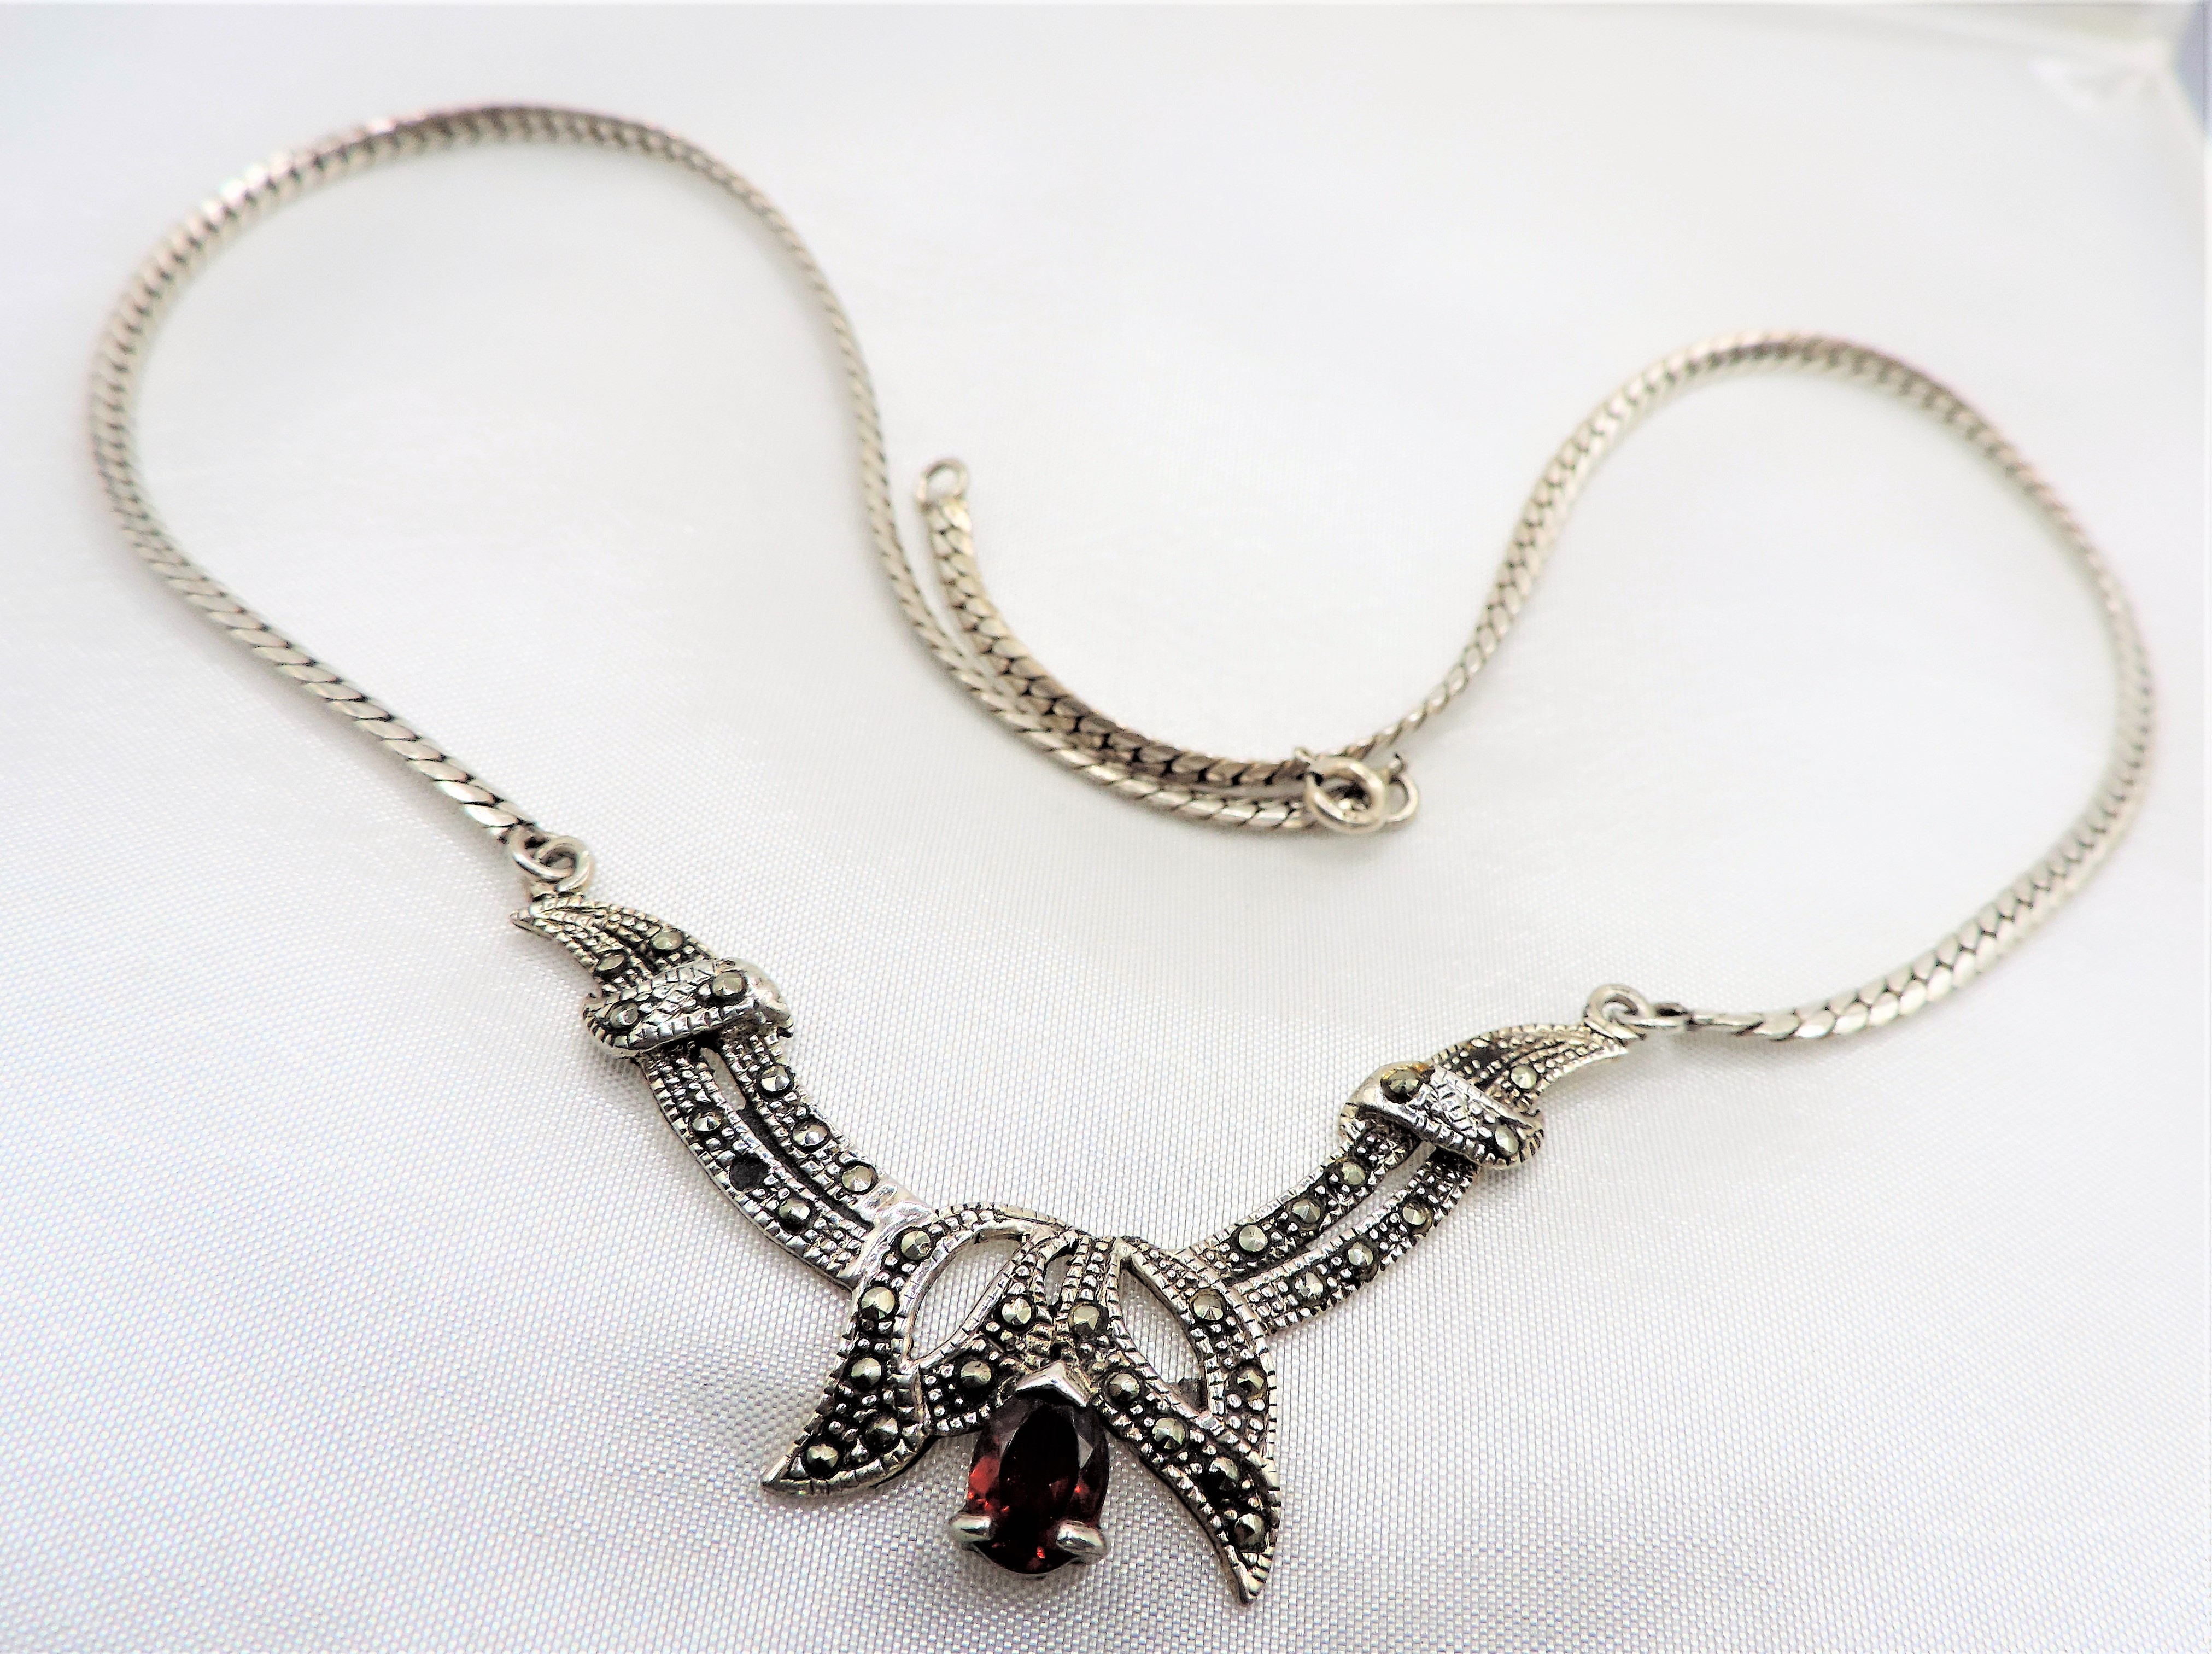 Vintage Marcasite & Garnet Necklace. A lovely necklace 16 inches long set with Marcasites and a - Image 3 of 3